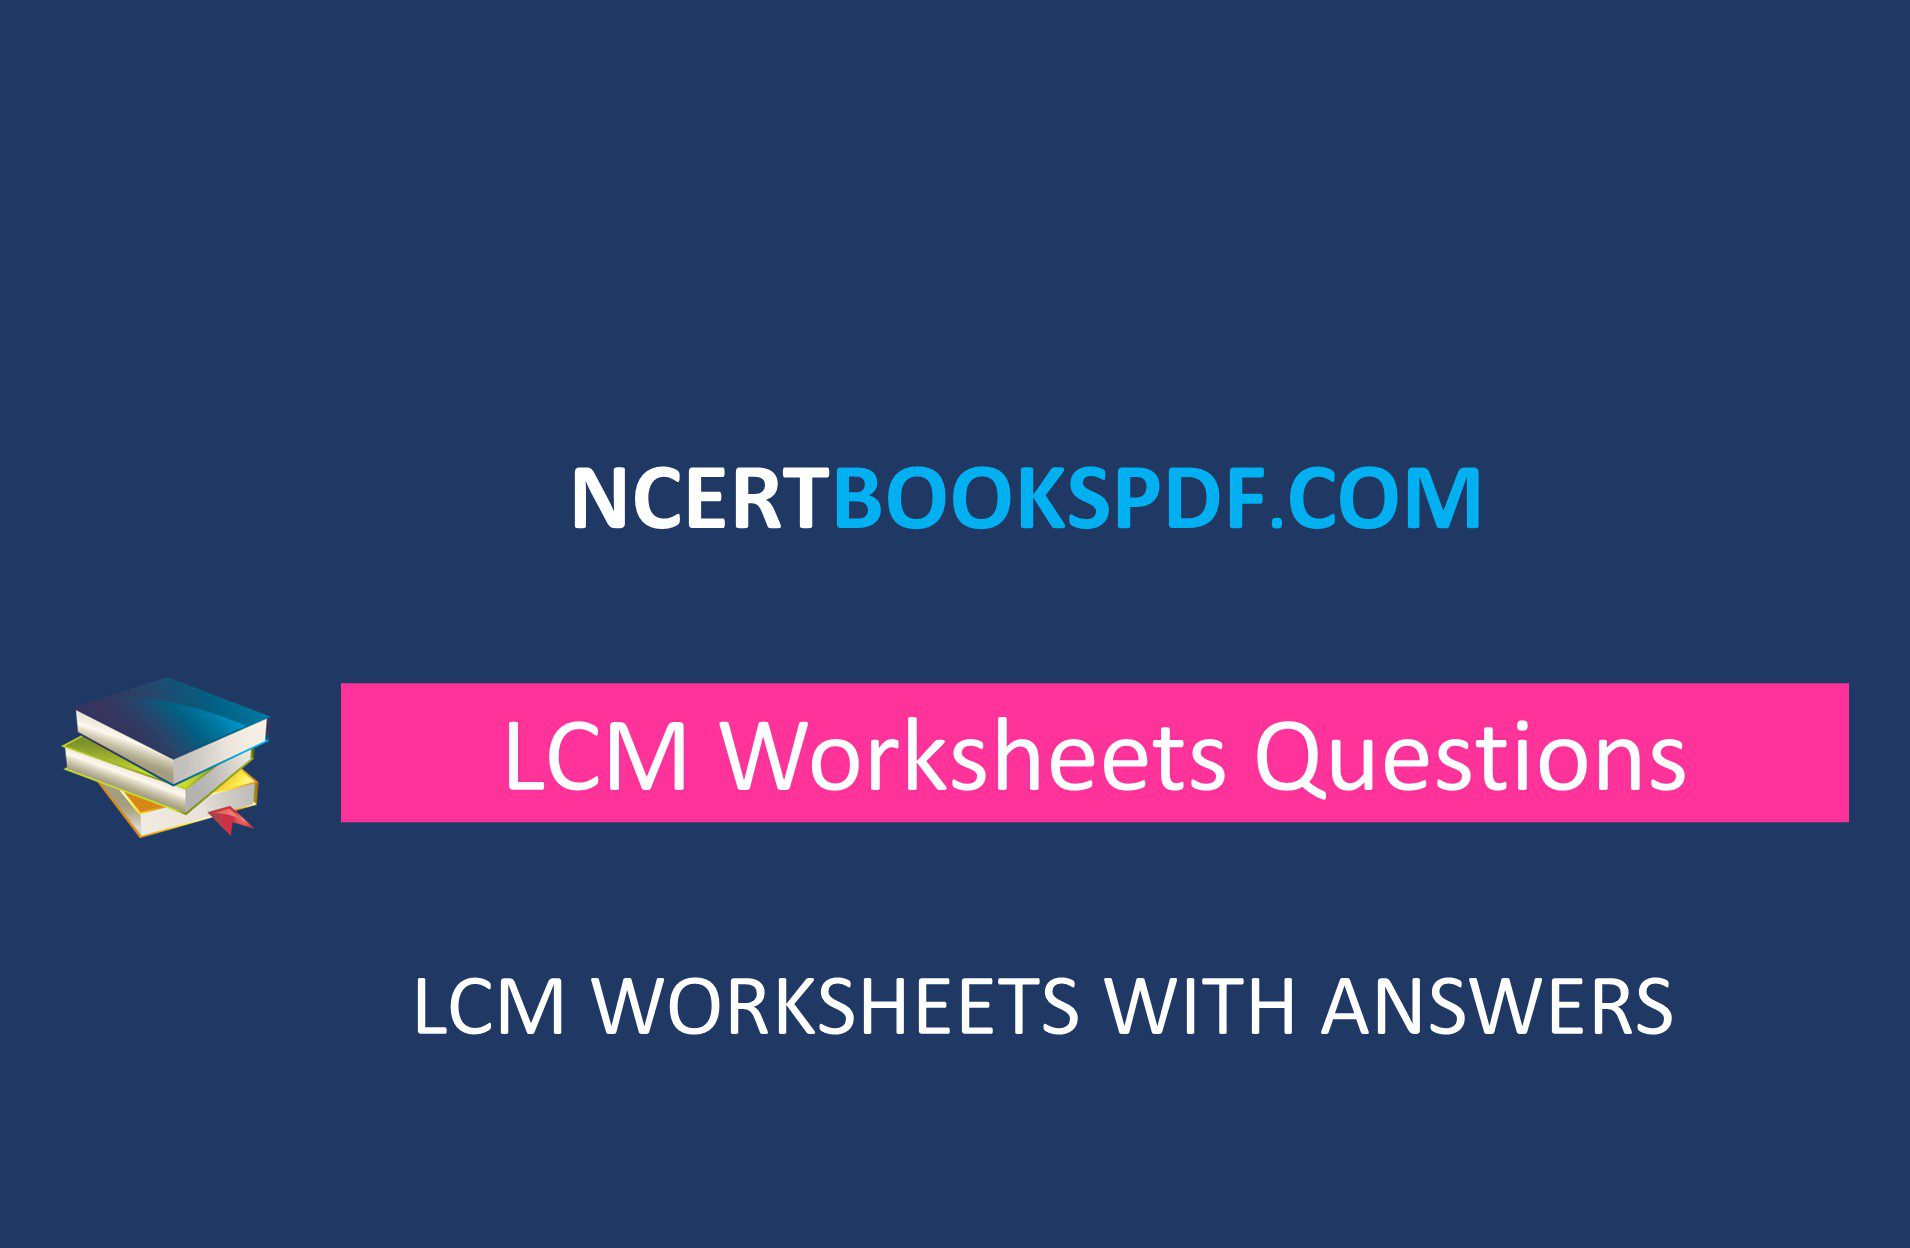 LCM Worksheet Questions for Class 5 With Answers